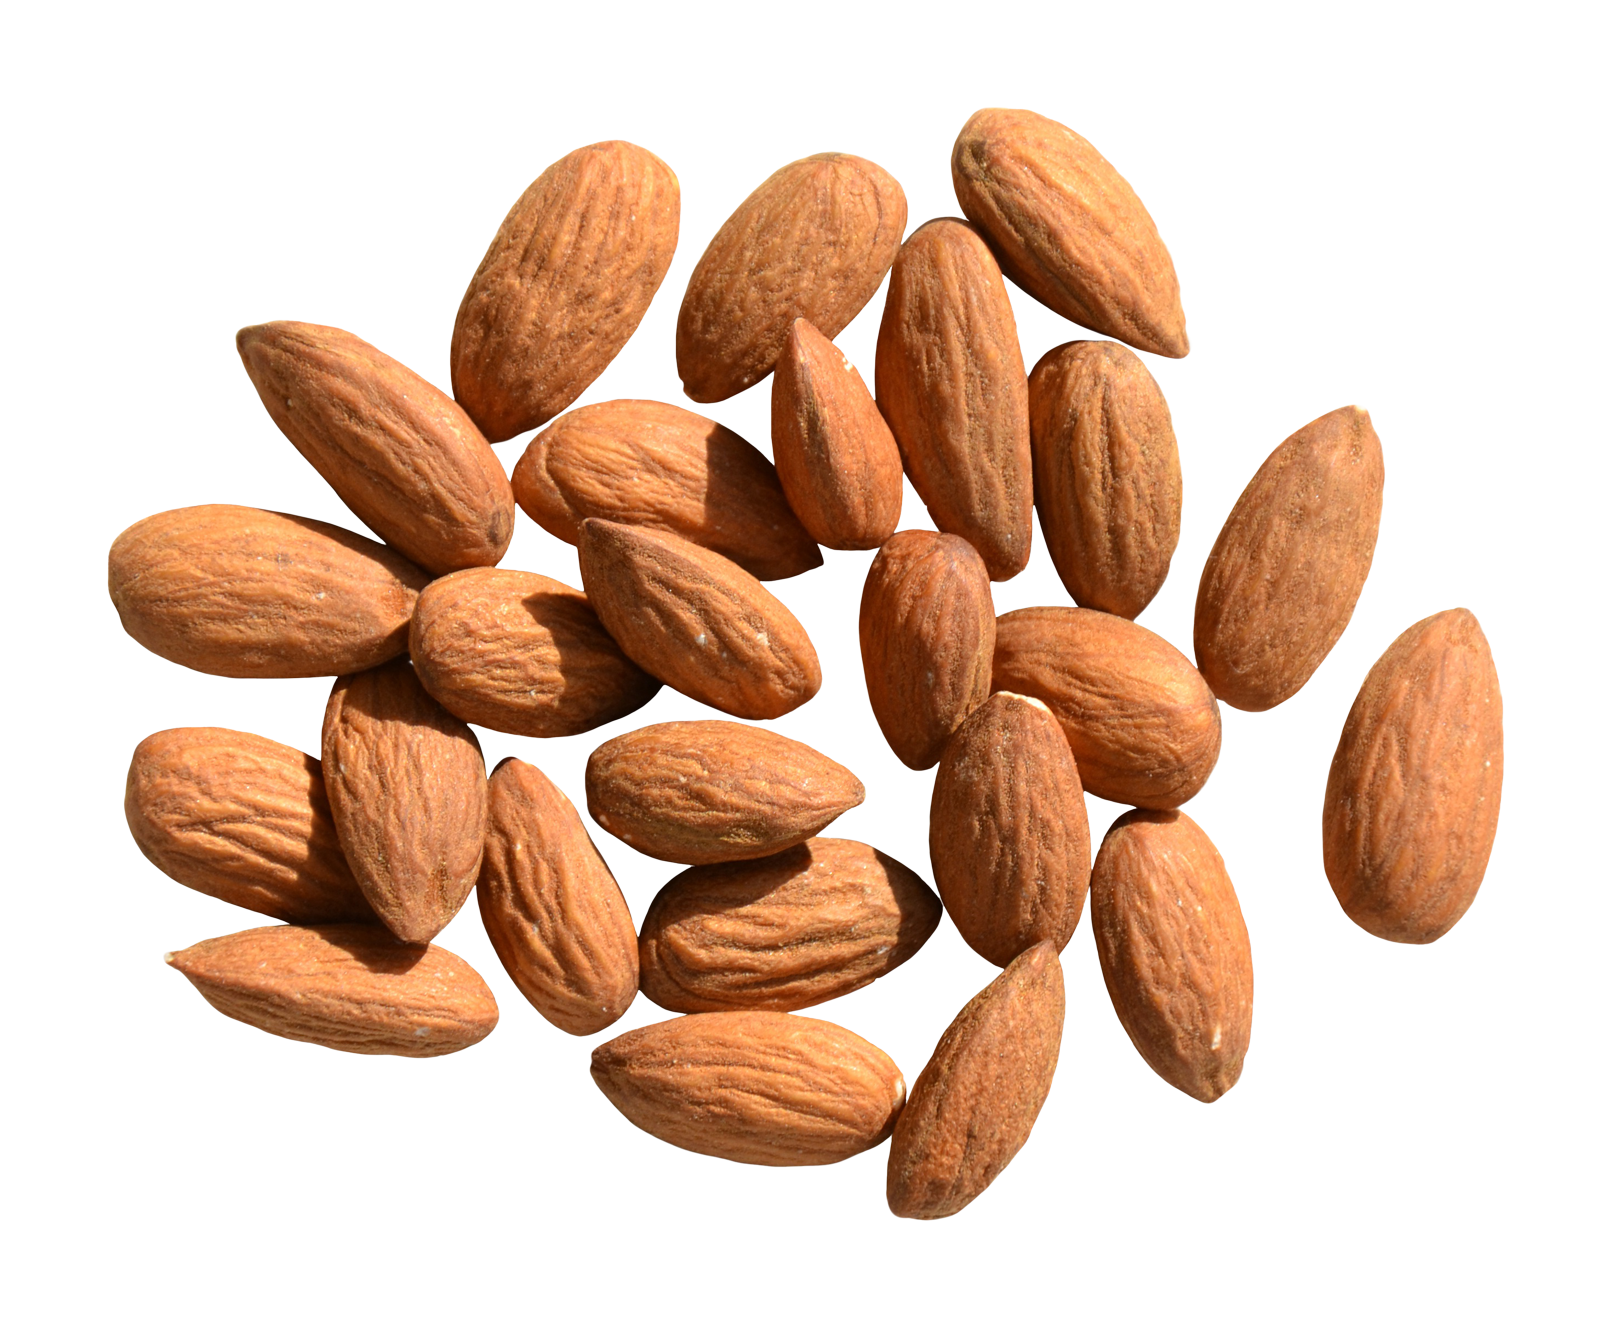 Almond PNG Image - PurePNG | Free transparent CC0 PNG Image Library